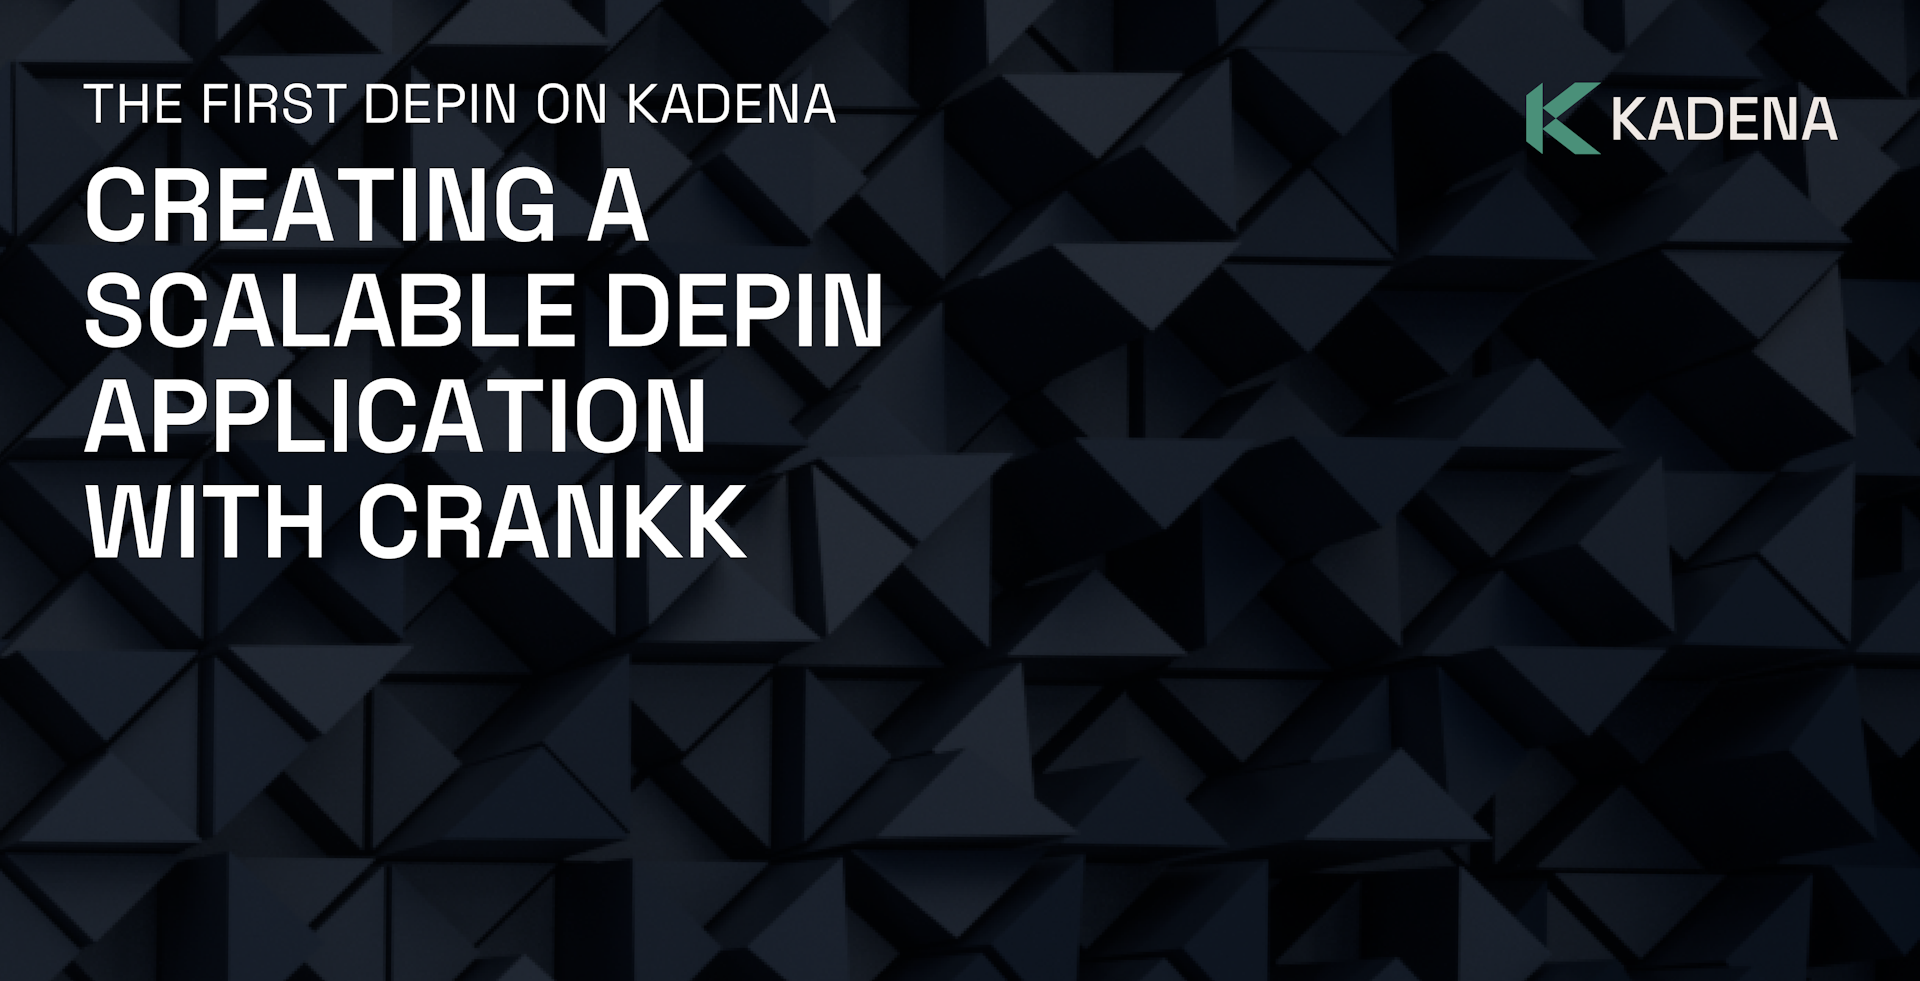 The First DePIN on Kadena: Creating a Scalable DePIN Application with Crankk